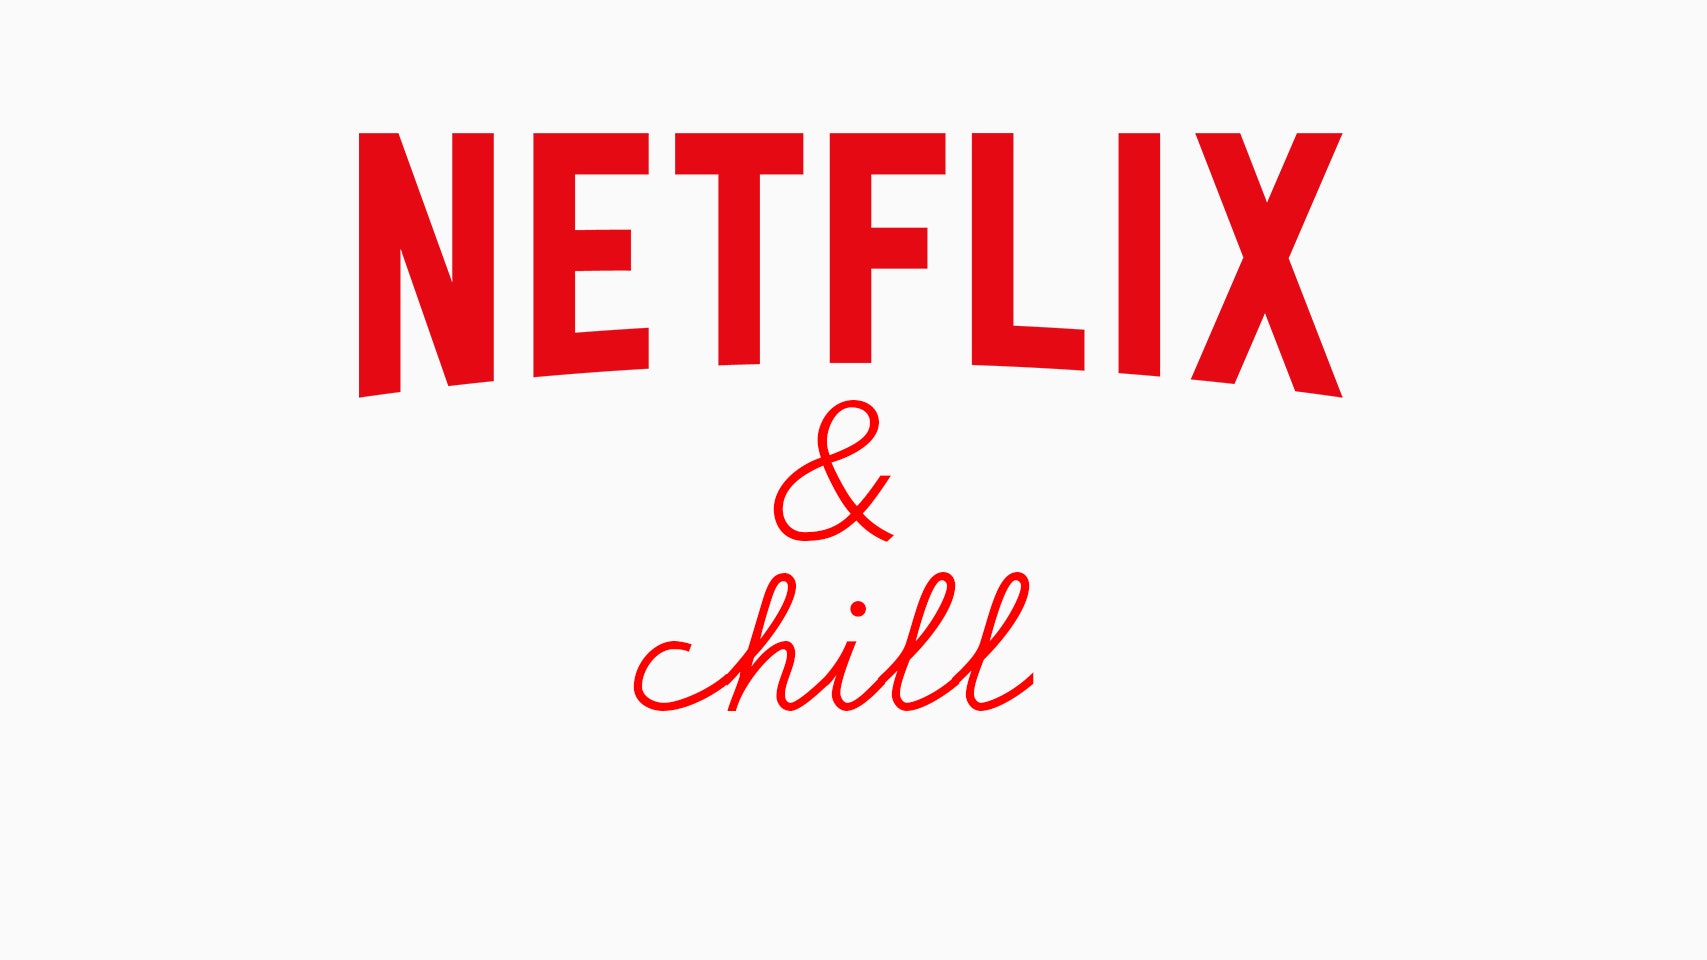 you ask a person on a date to watch Netflix and chill…it actually means you...